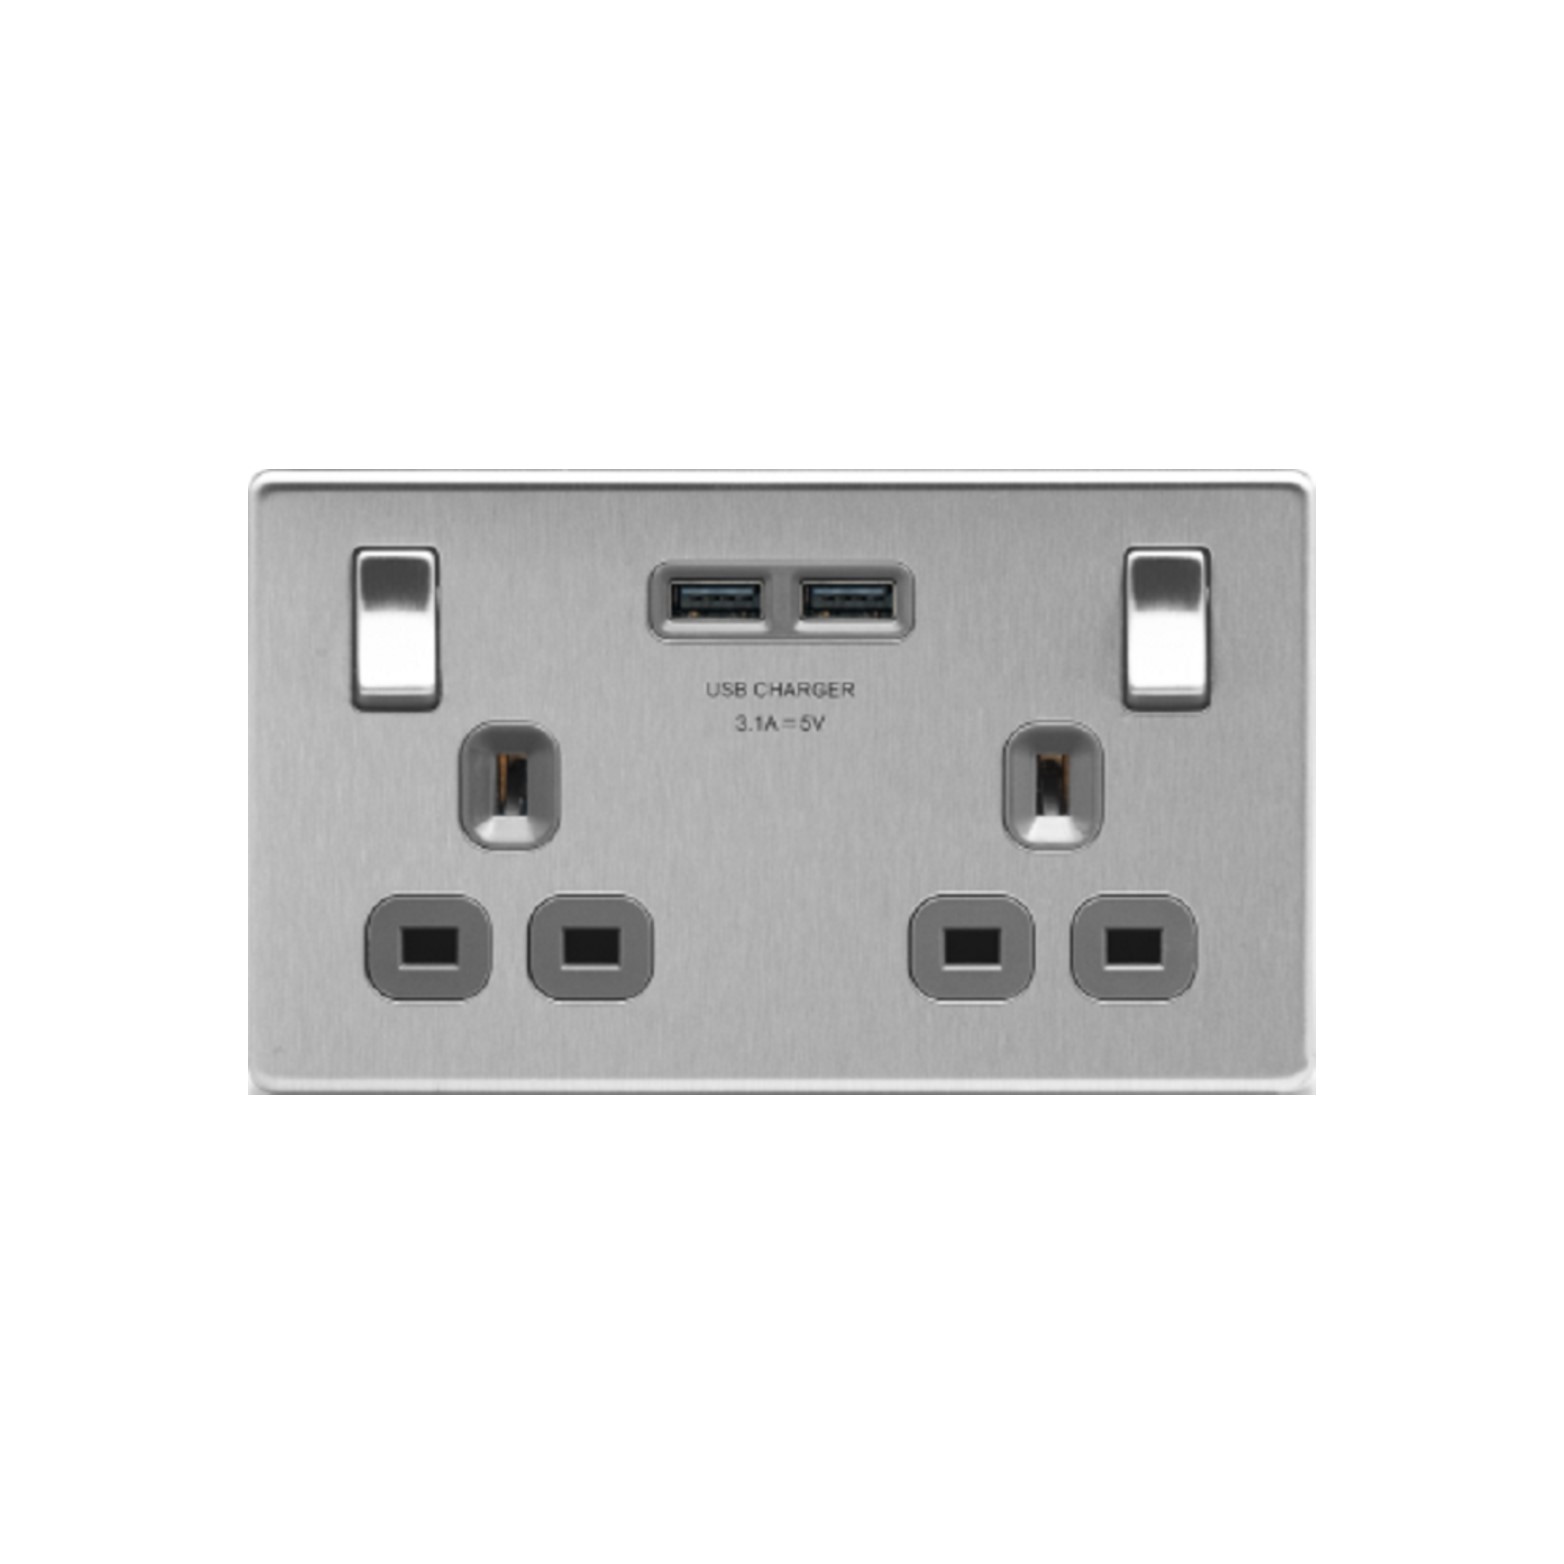 Flatplate Brushed Steel 2USB 3.1A 2-Gang 13A Switched Wall Socket Grey Insert, USB Charger(FBS22U3G)